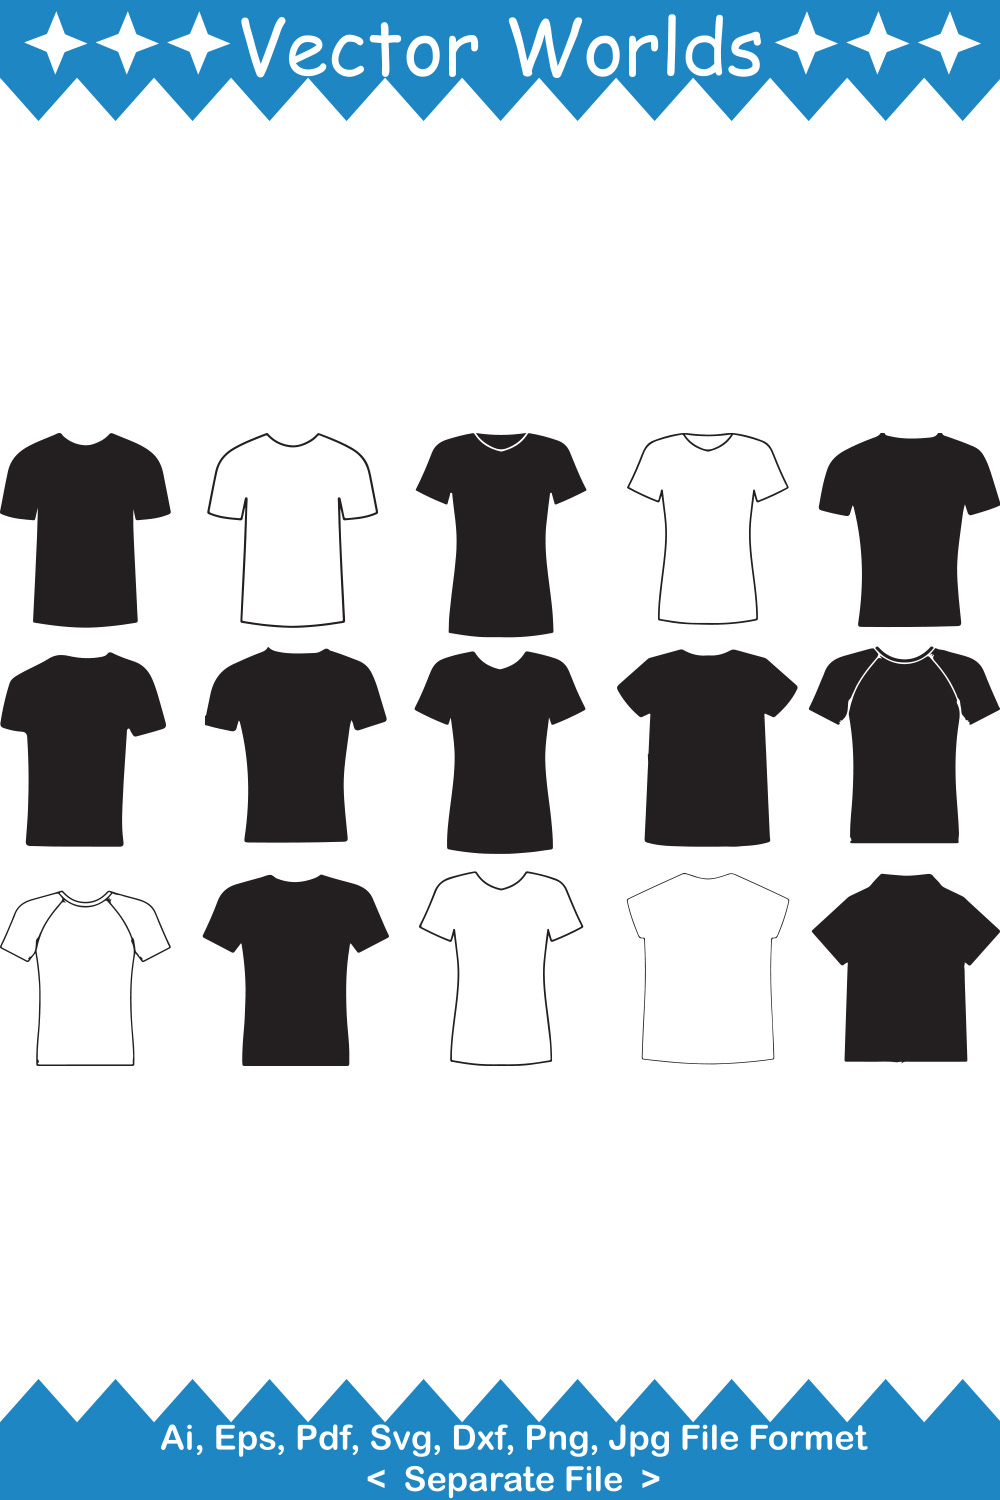 Set of vector beautiful images of short sleeve shirt silhouettes.